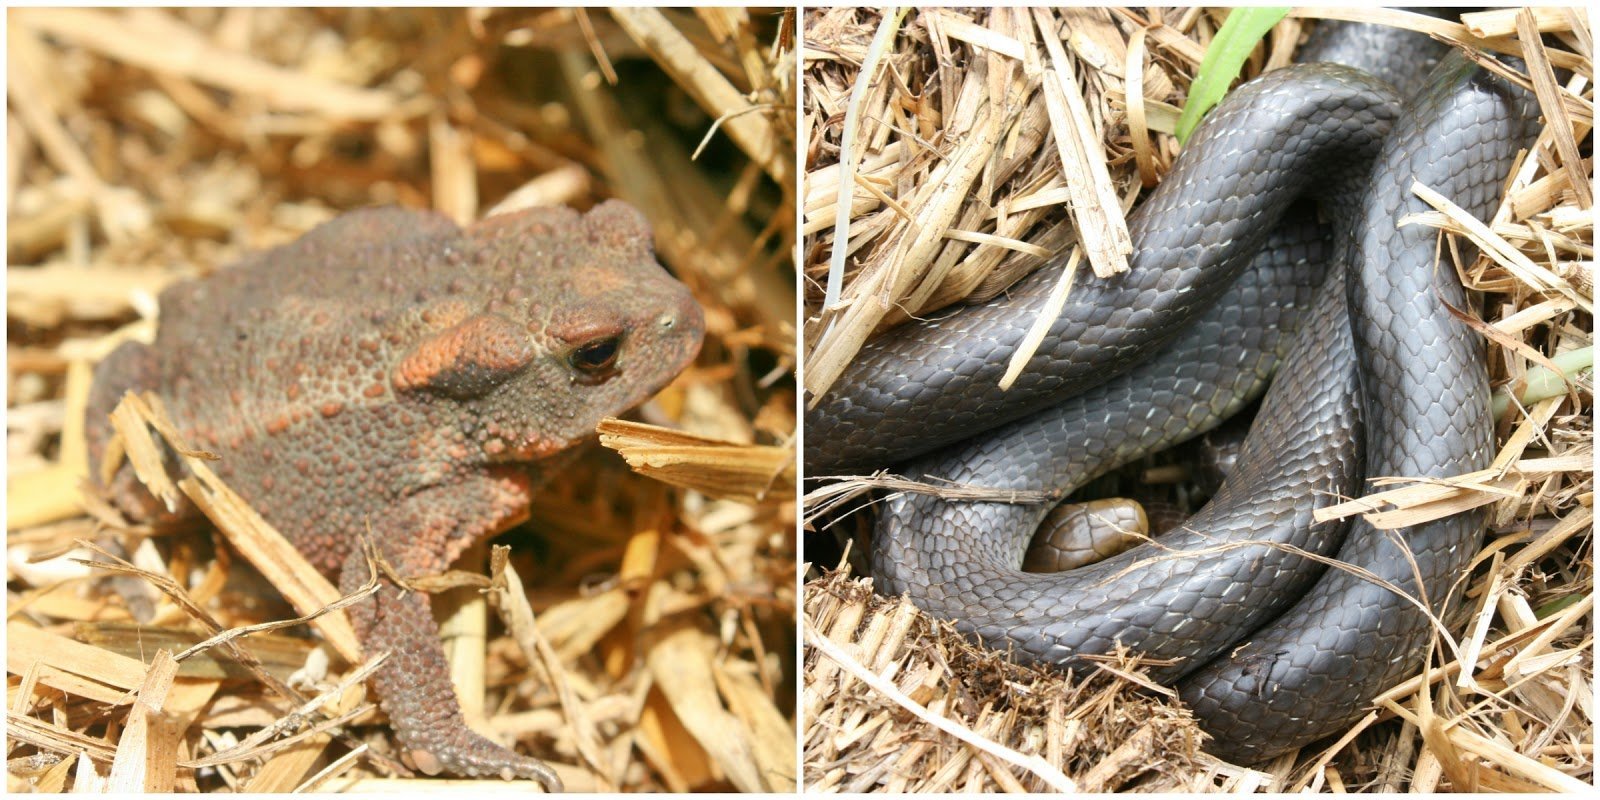 Common Toad - Bufo bufo and Aesculapian snake - Zamenis longissimus photographed within one of our Straw bale stacks.  